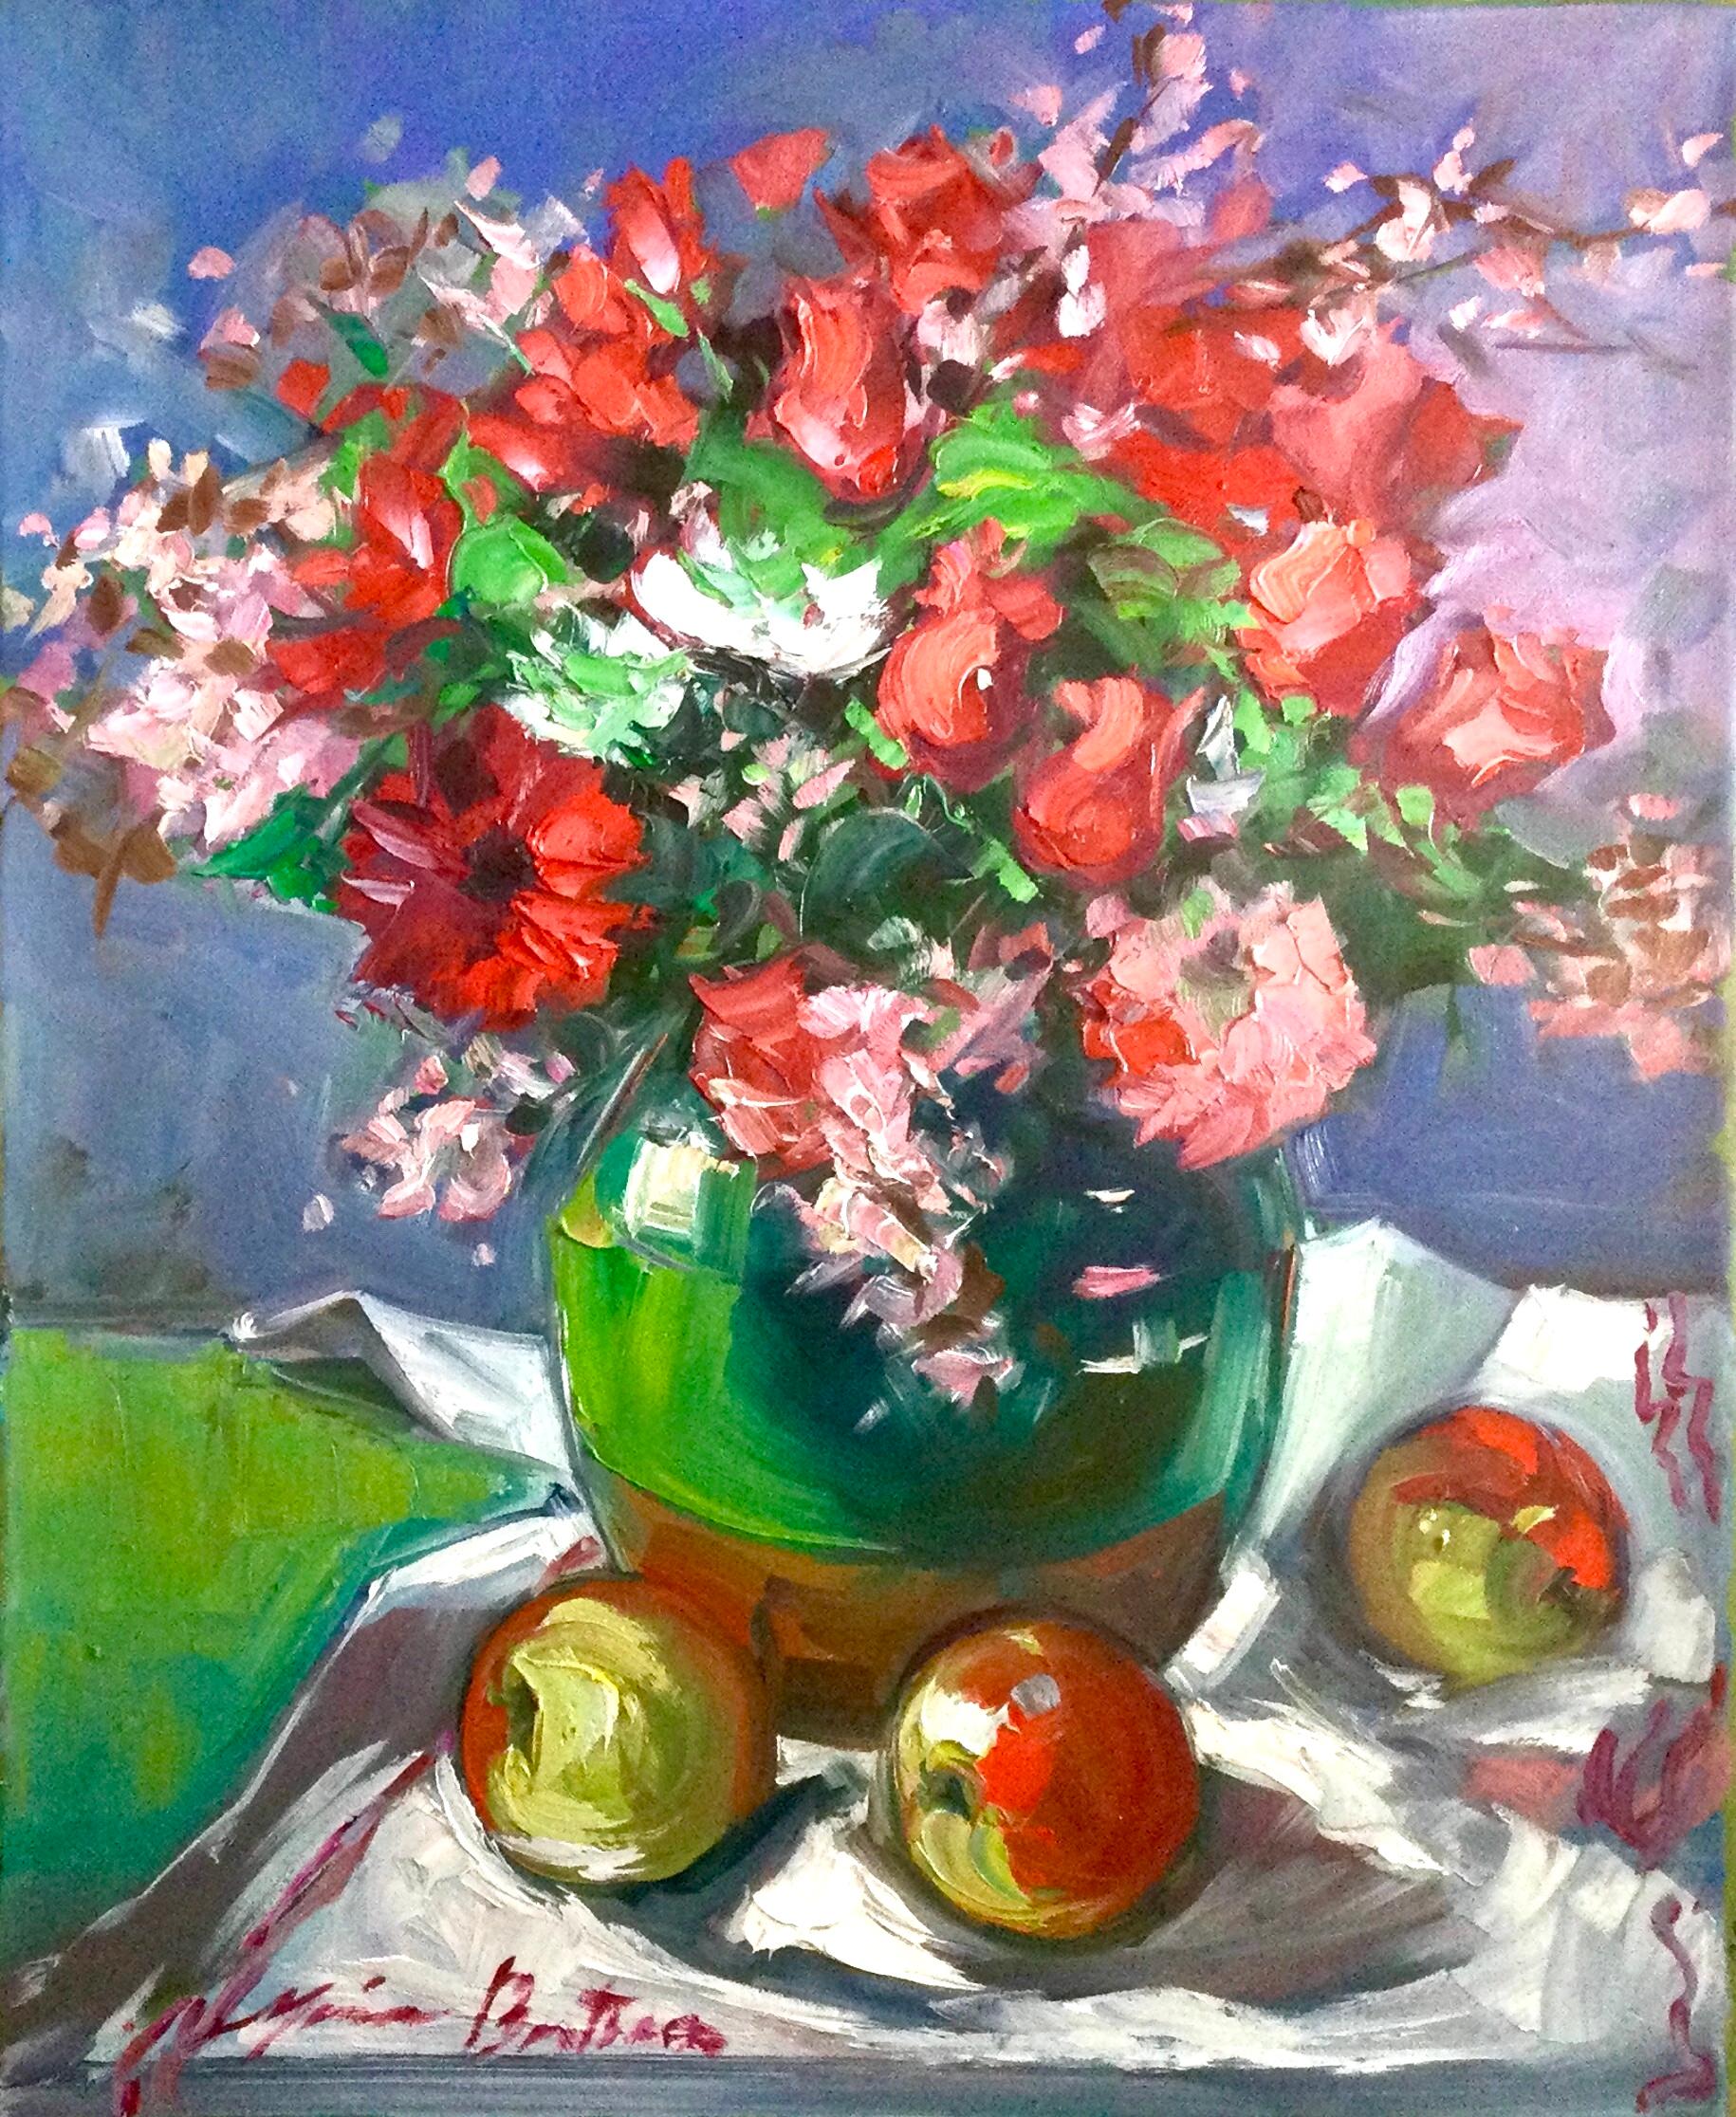 Maria Bertrán Still-Life Painting - "Provencal Roses With Three Apples" Contemporary Impressionist Still Life Oil